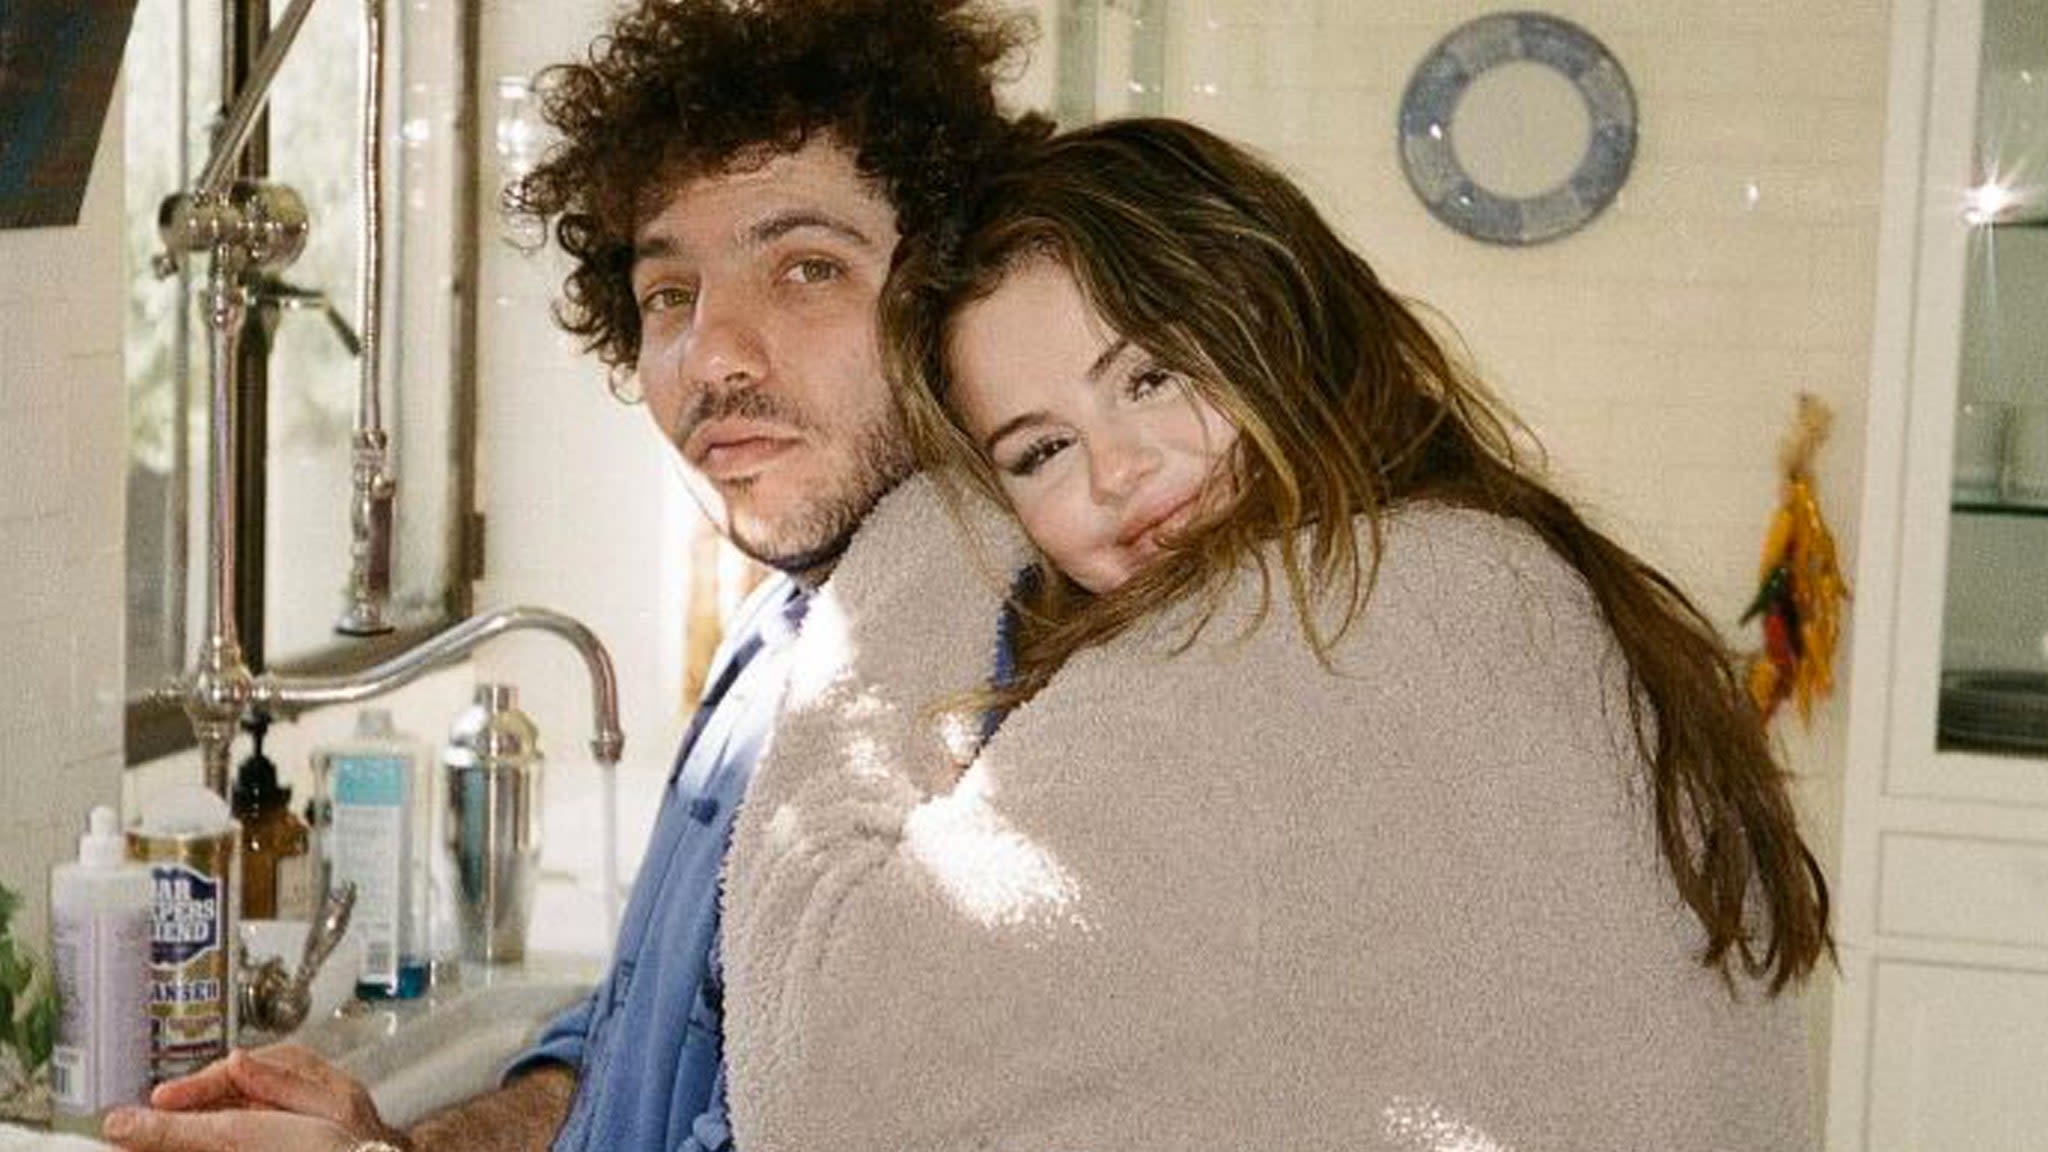 Benny Blanco Recalls the Moment He Realized He Was 'In Love' with Selena Gomez